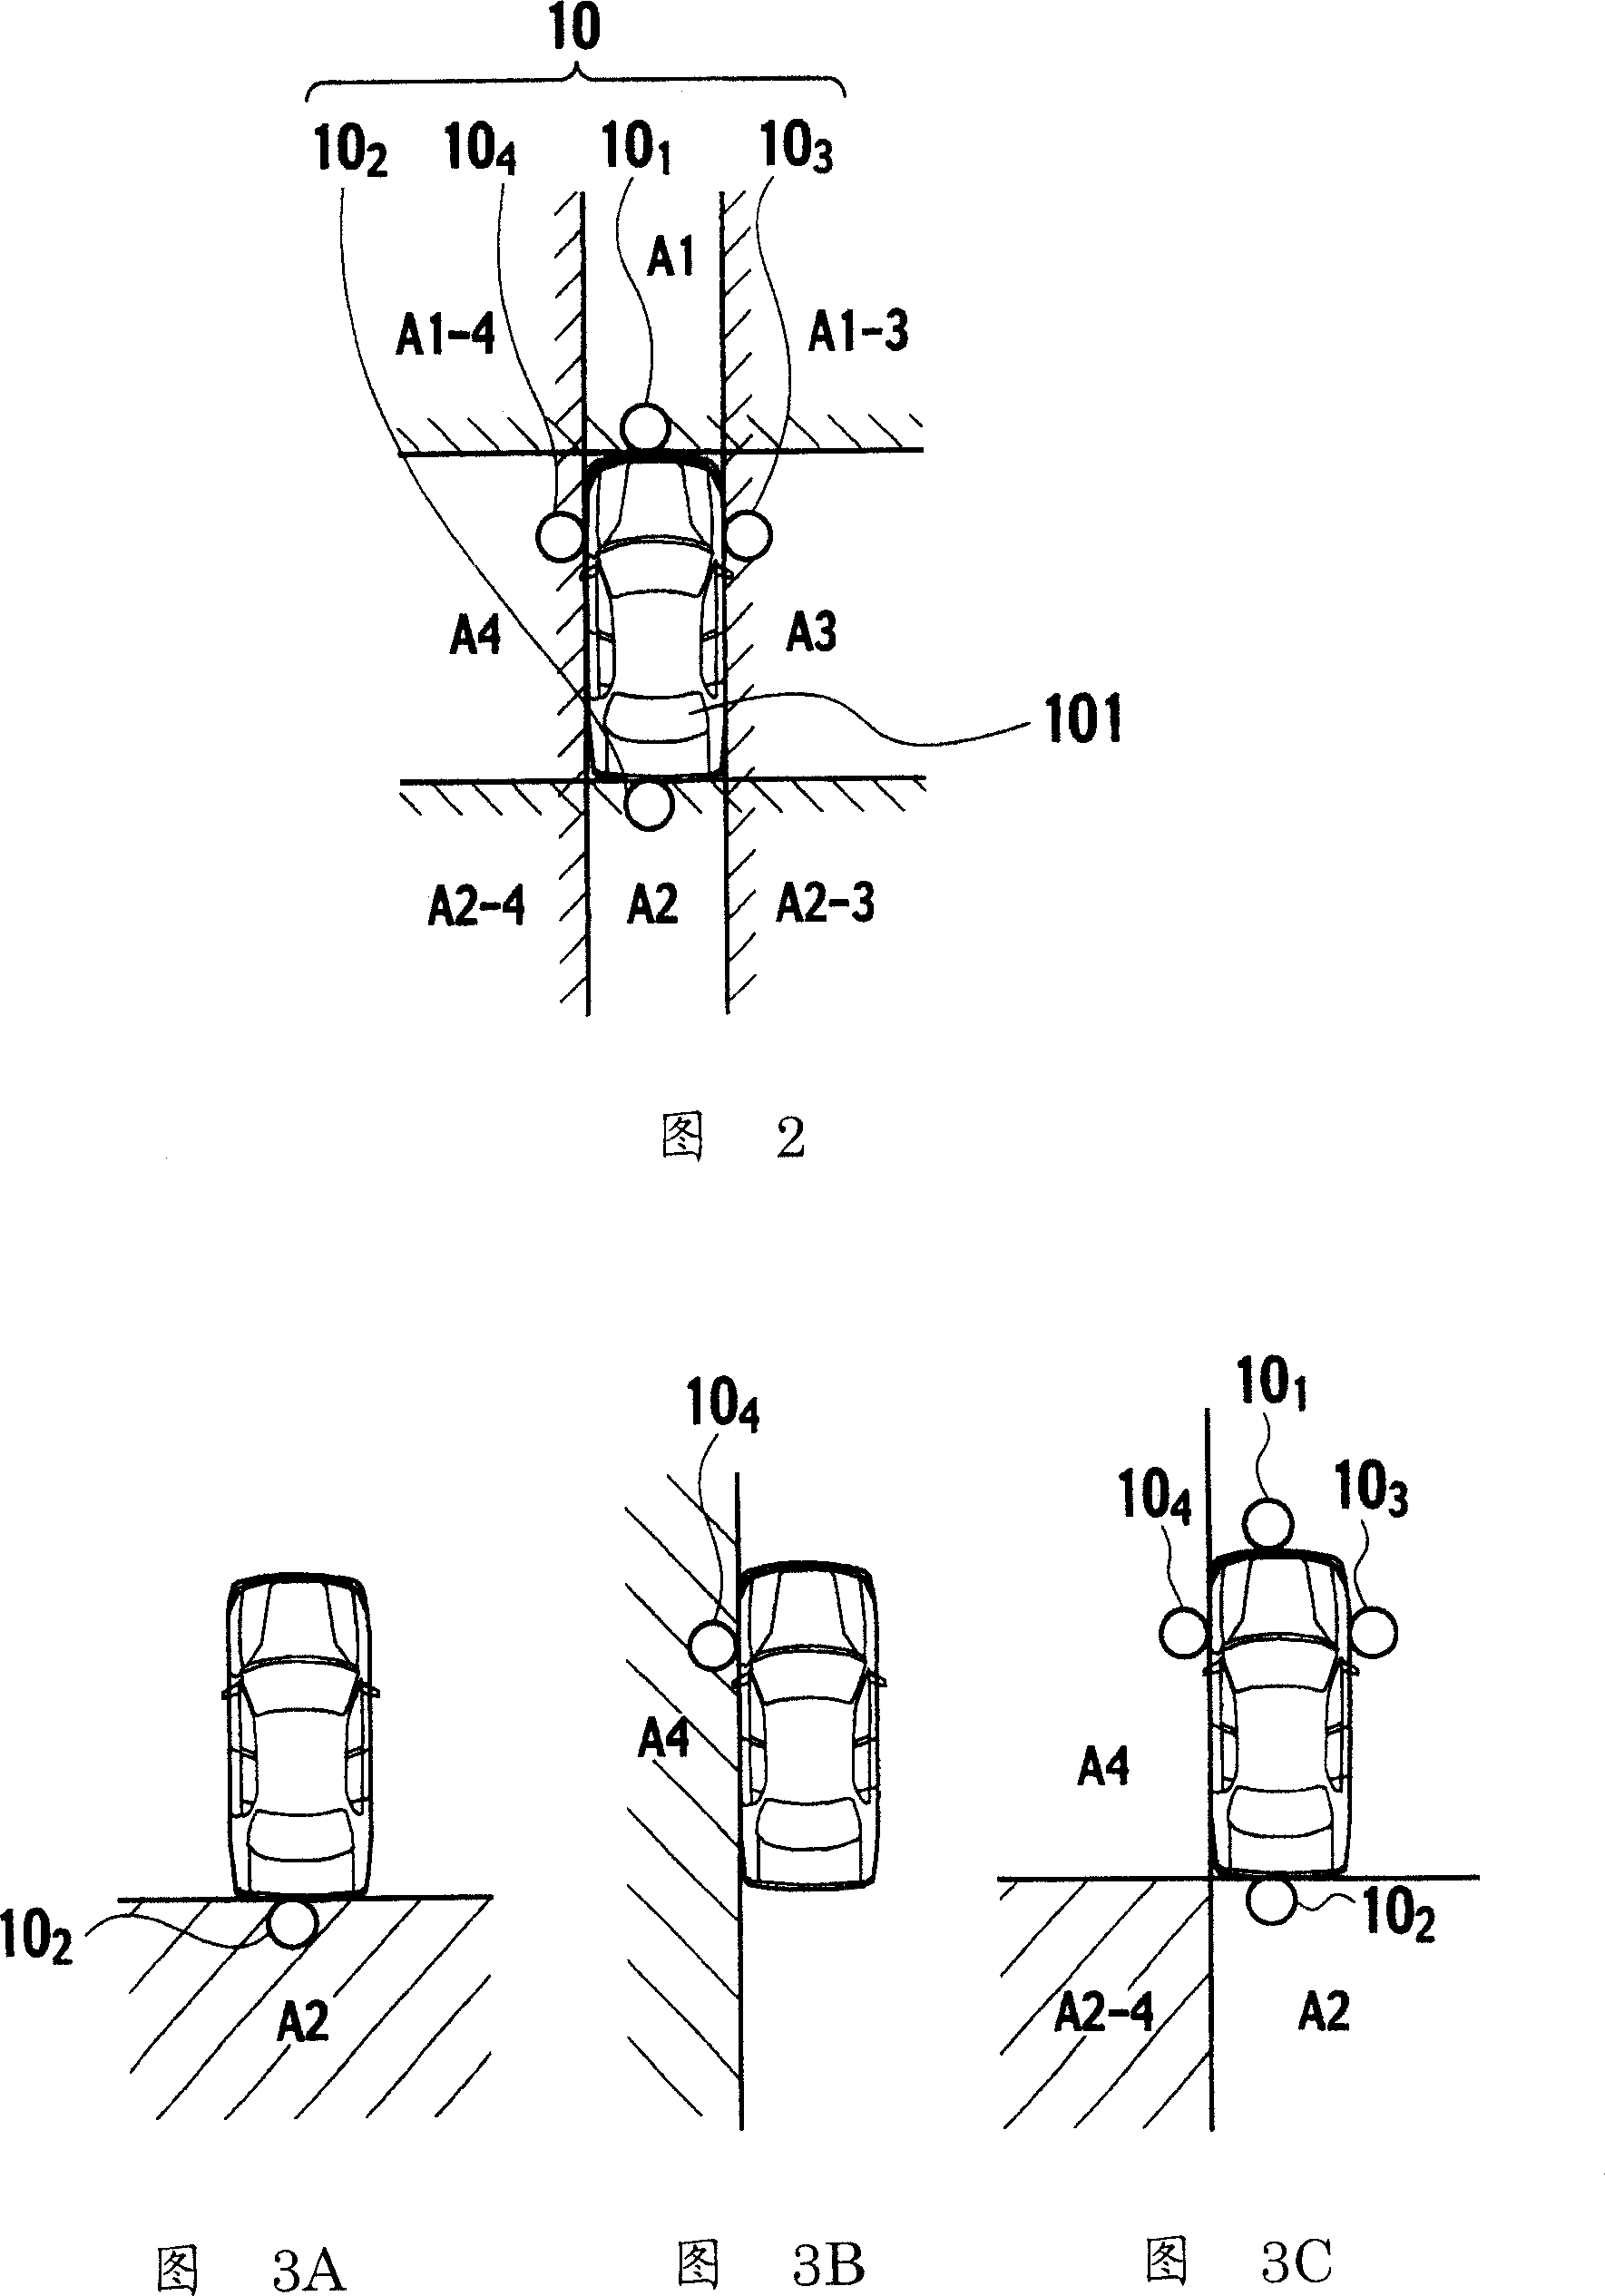 Driving support system and method of producing overhead view image